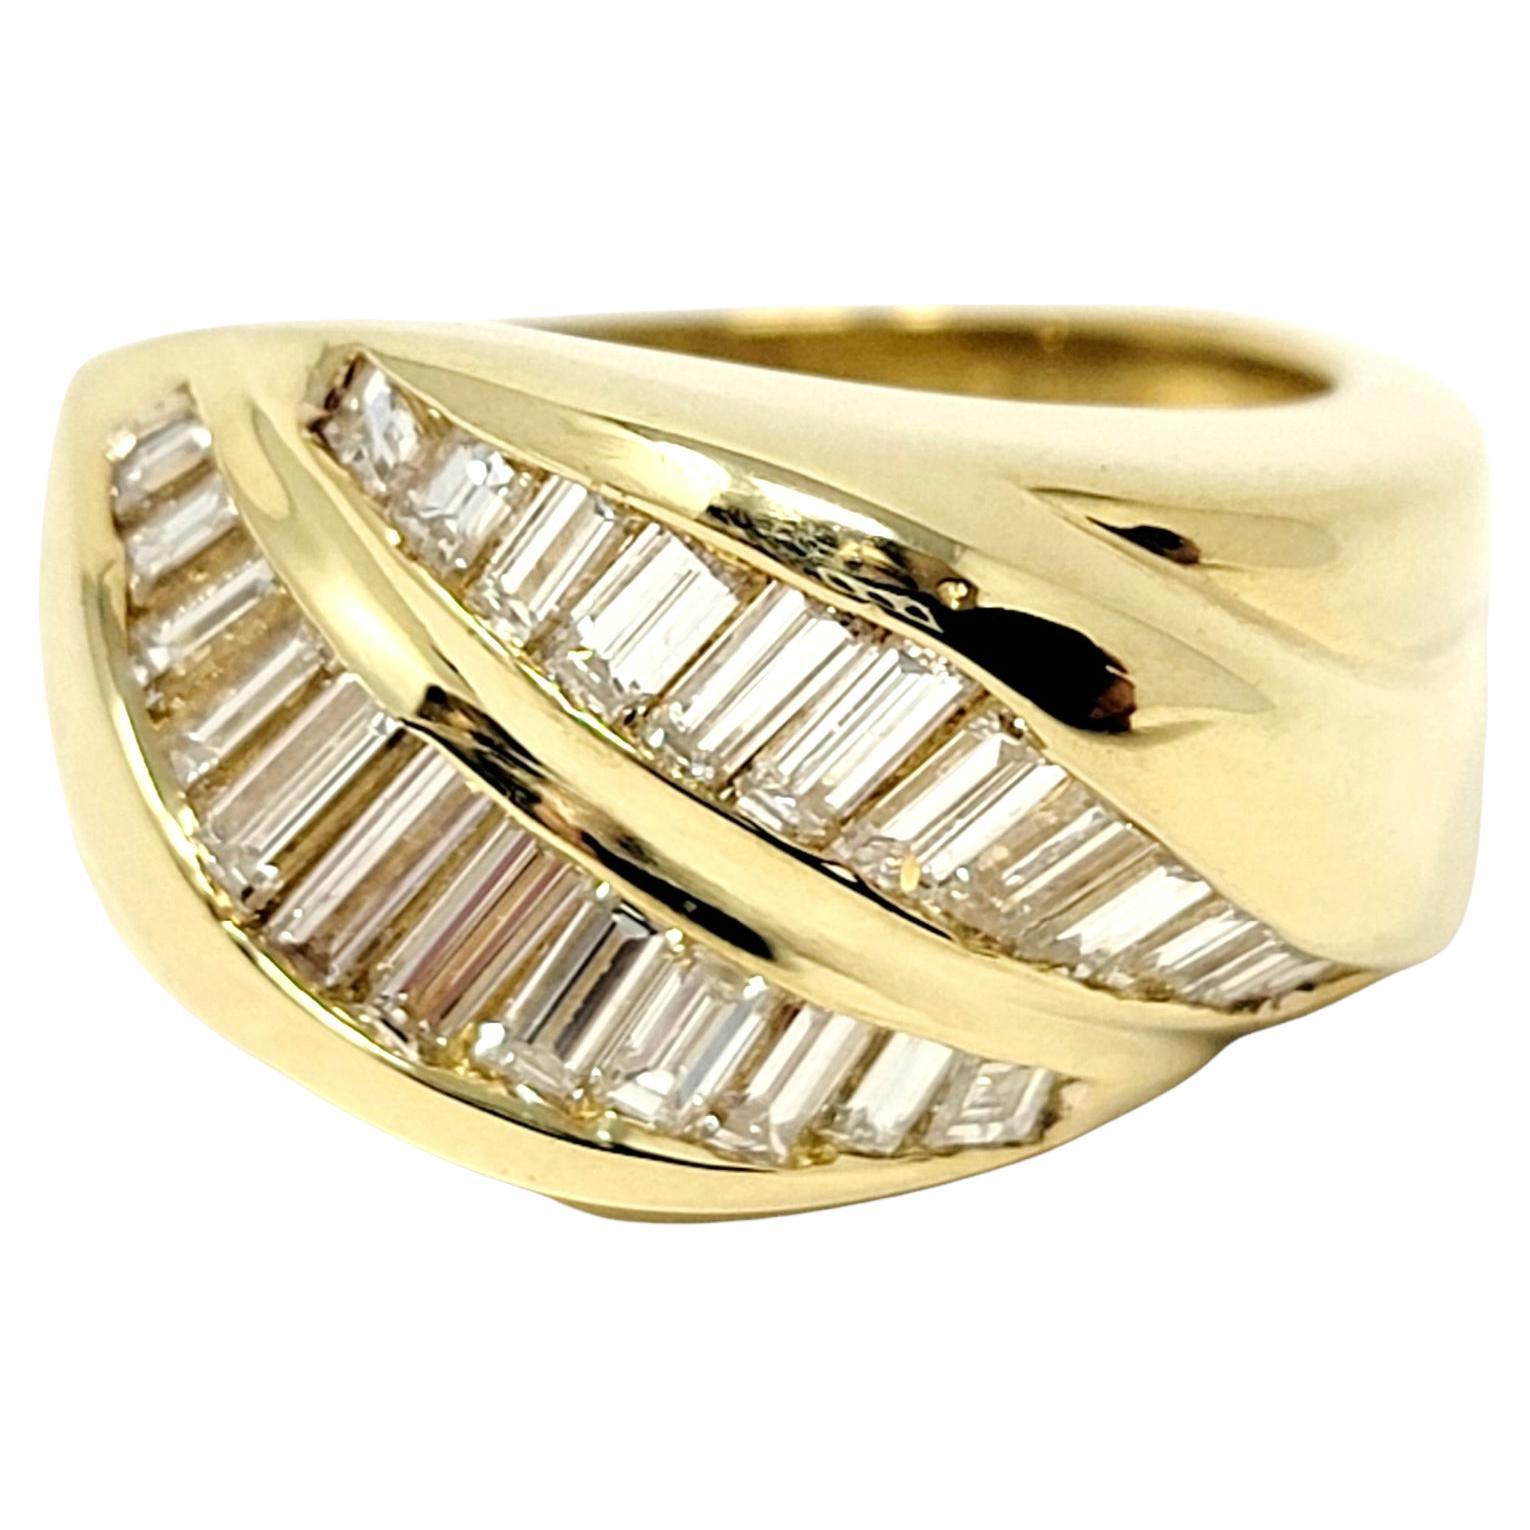 Ring size: 6.75

Stunning vintage Henri Carre baguette diamond band ring in polished 18 karat yellow gold. This unique piece features curved lines and ridged detailing paired with two sleek rows of graduated icy white baguette diamonds. The natural